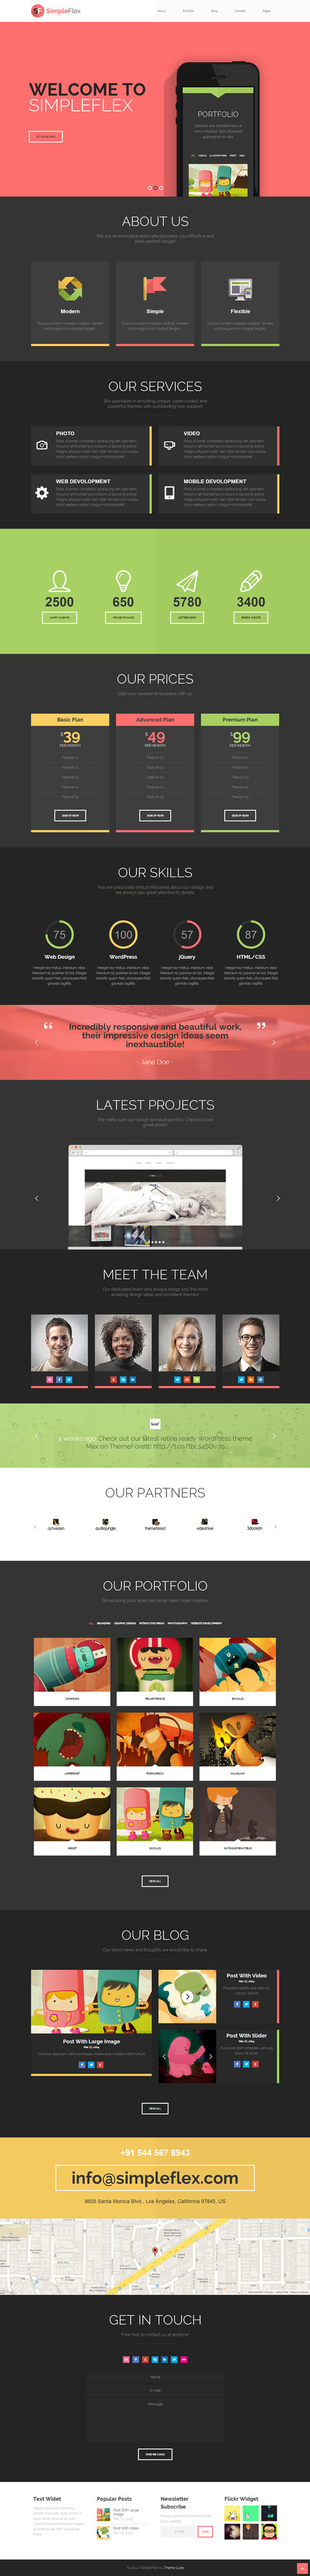 Flat One Page WordPress Theme #flat #page #design #colors #concept #web #one #layout #dark